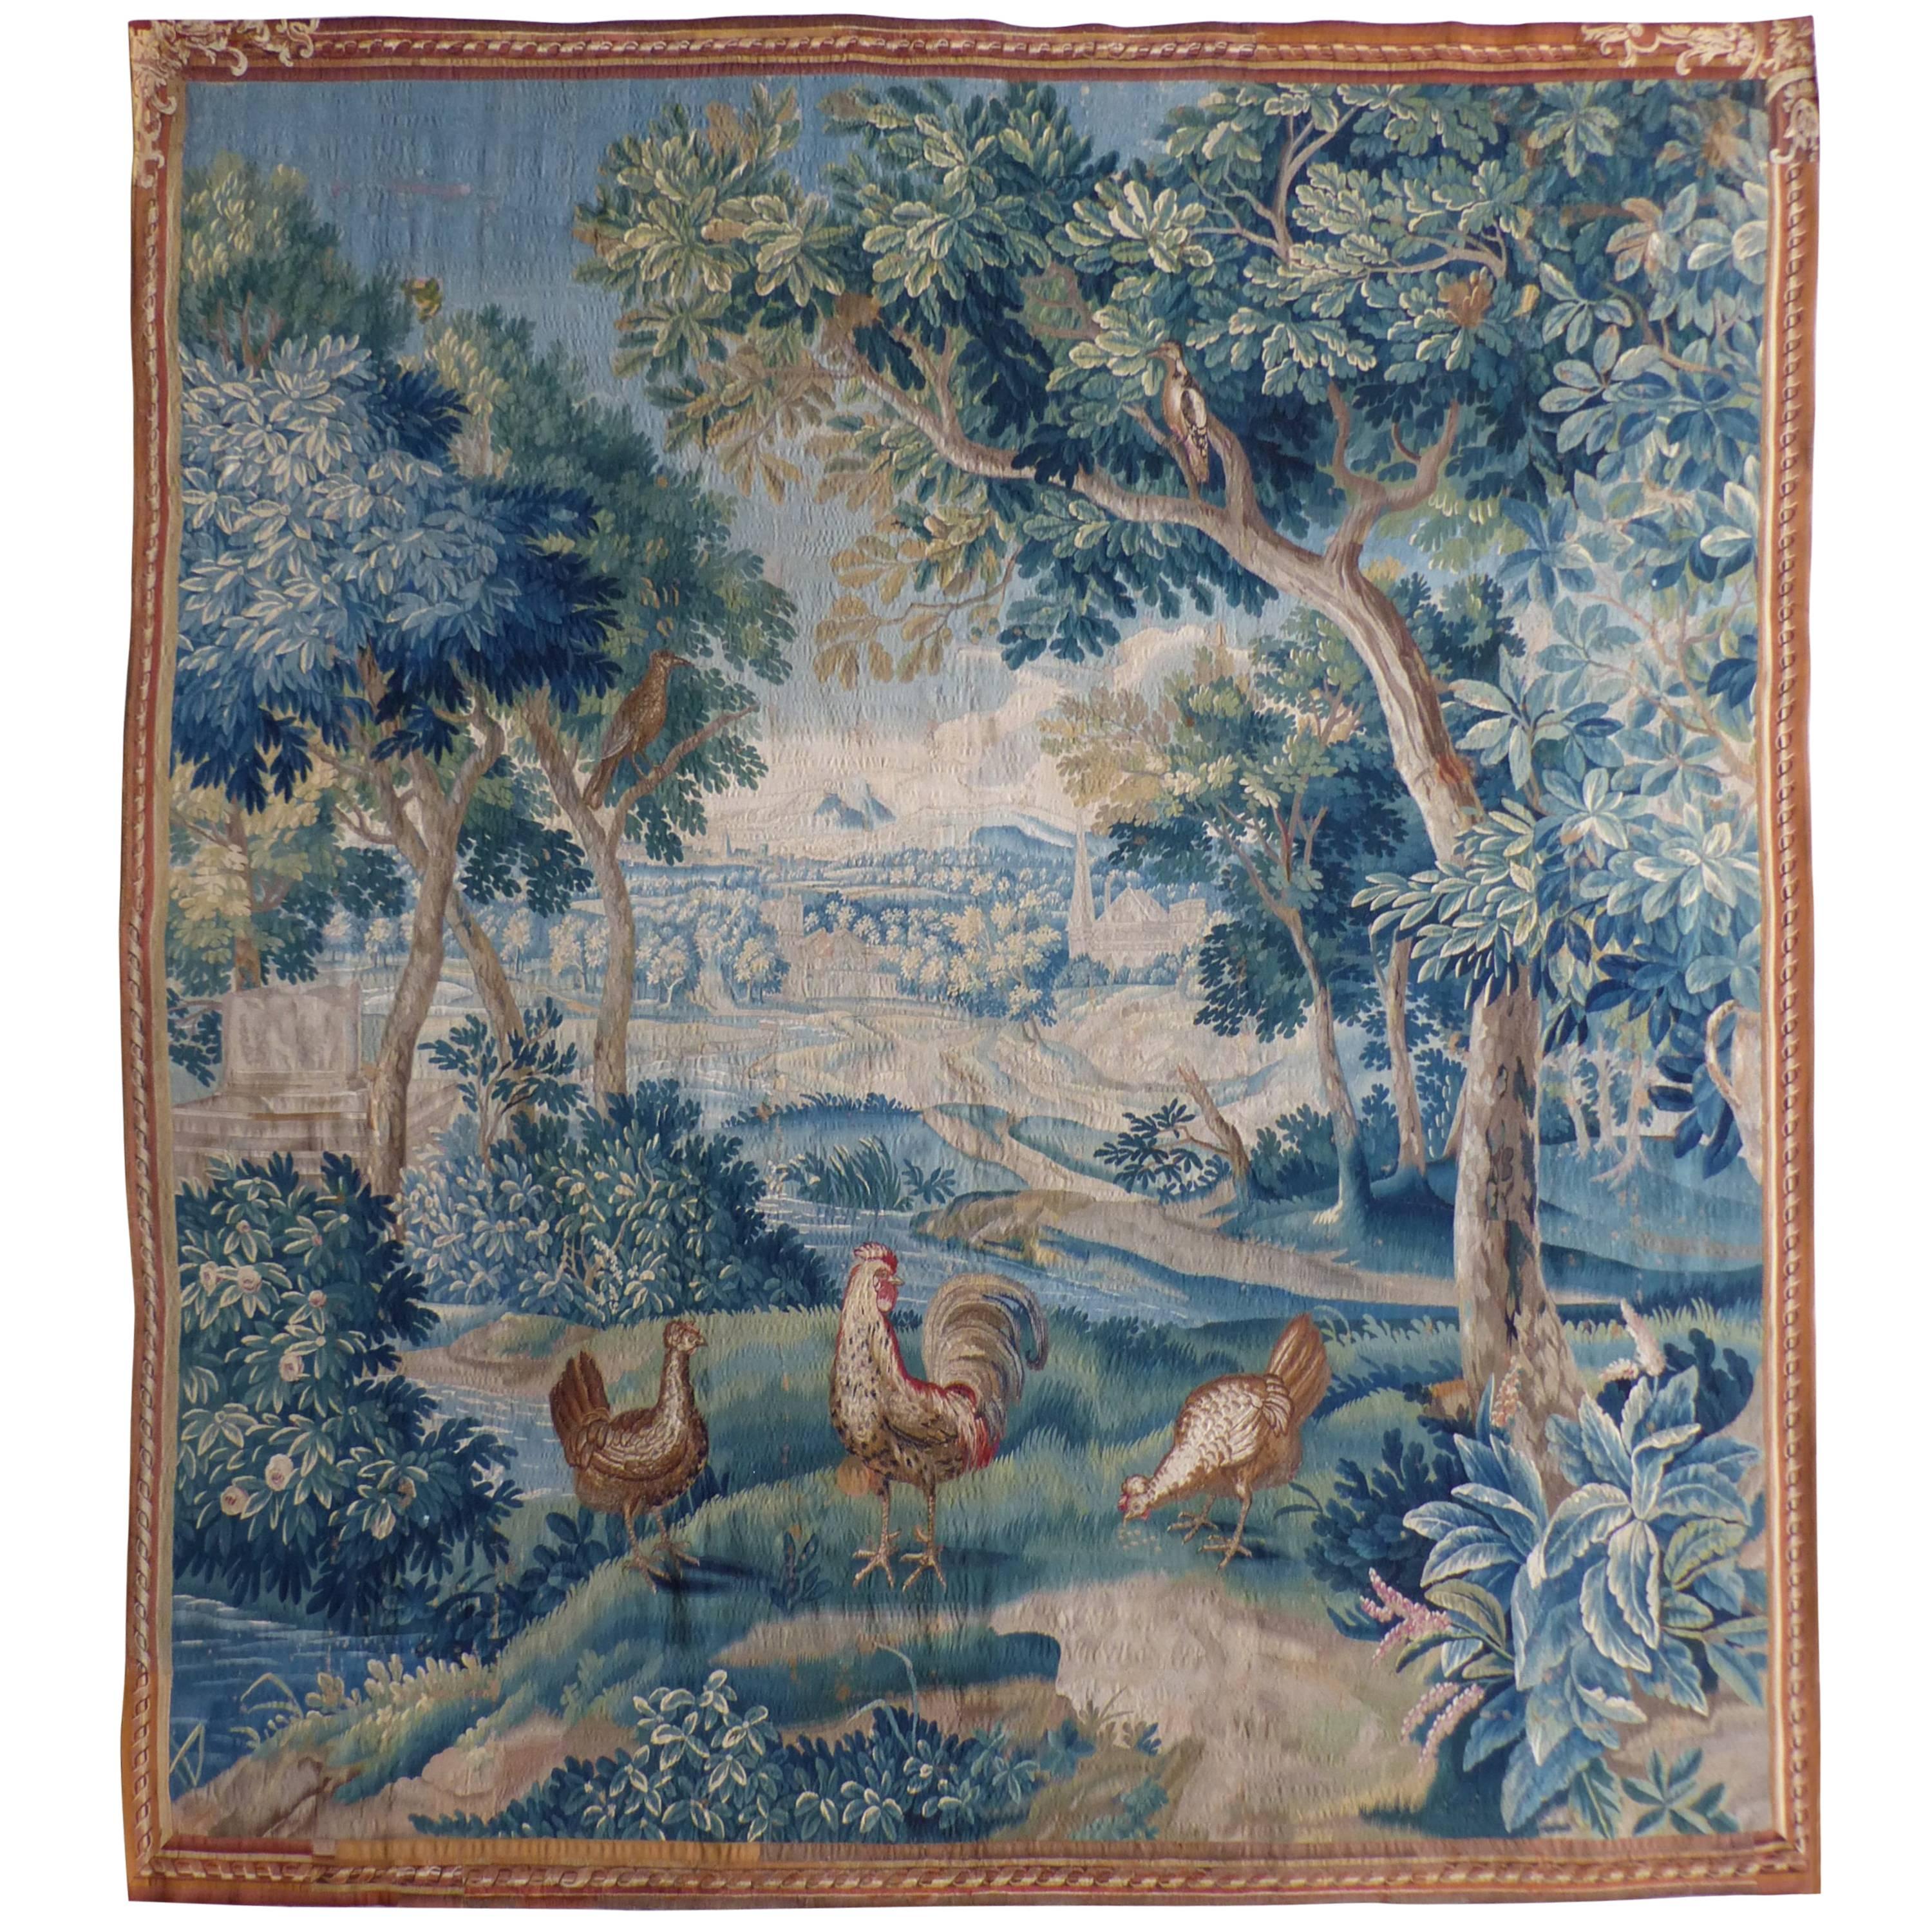 Exceptional Flemish Tapestry 18th Century Landscape with Birds and Architecture For Sale